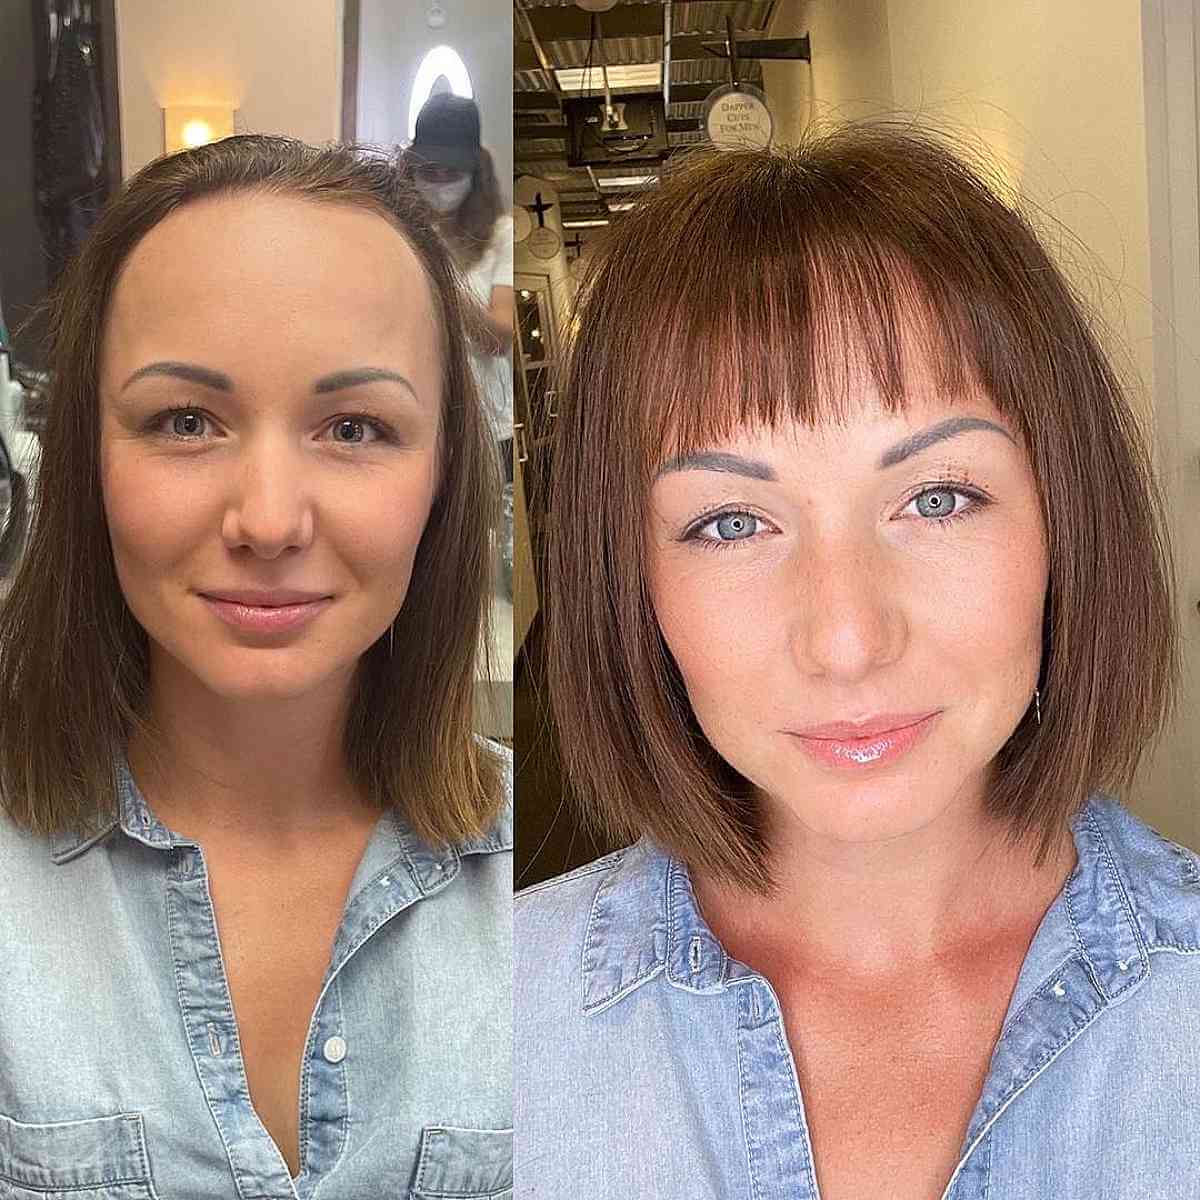 23 Volumizing Bobs with Bangs Women with Fine, Thin Hair Need to See